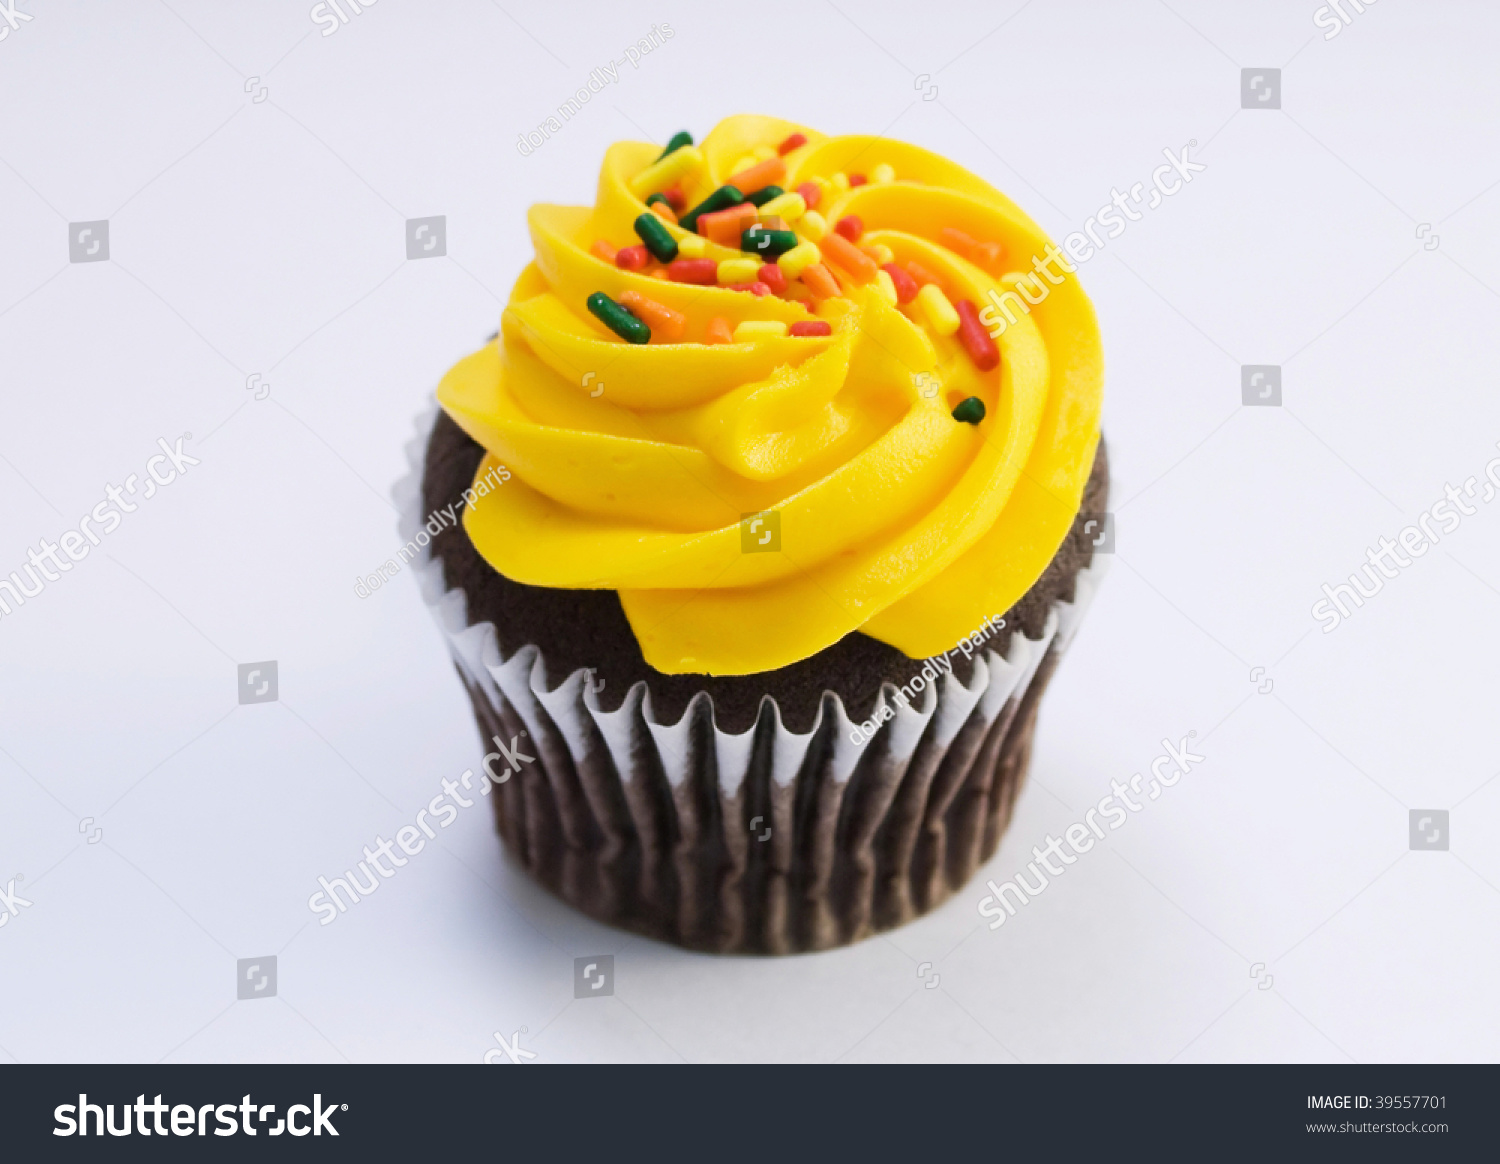 Download Chocolate Cupcake Yellow Icing Sprinkles Miscellaneous Stock Image 39557701 Yellowimages Mockups